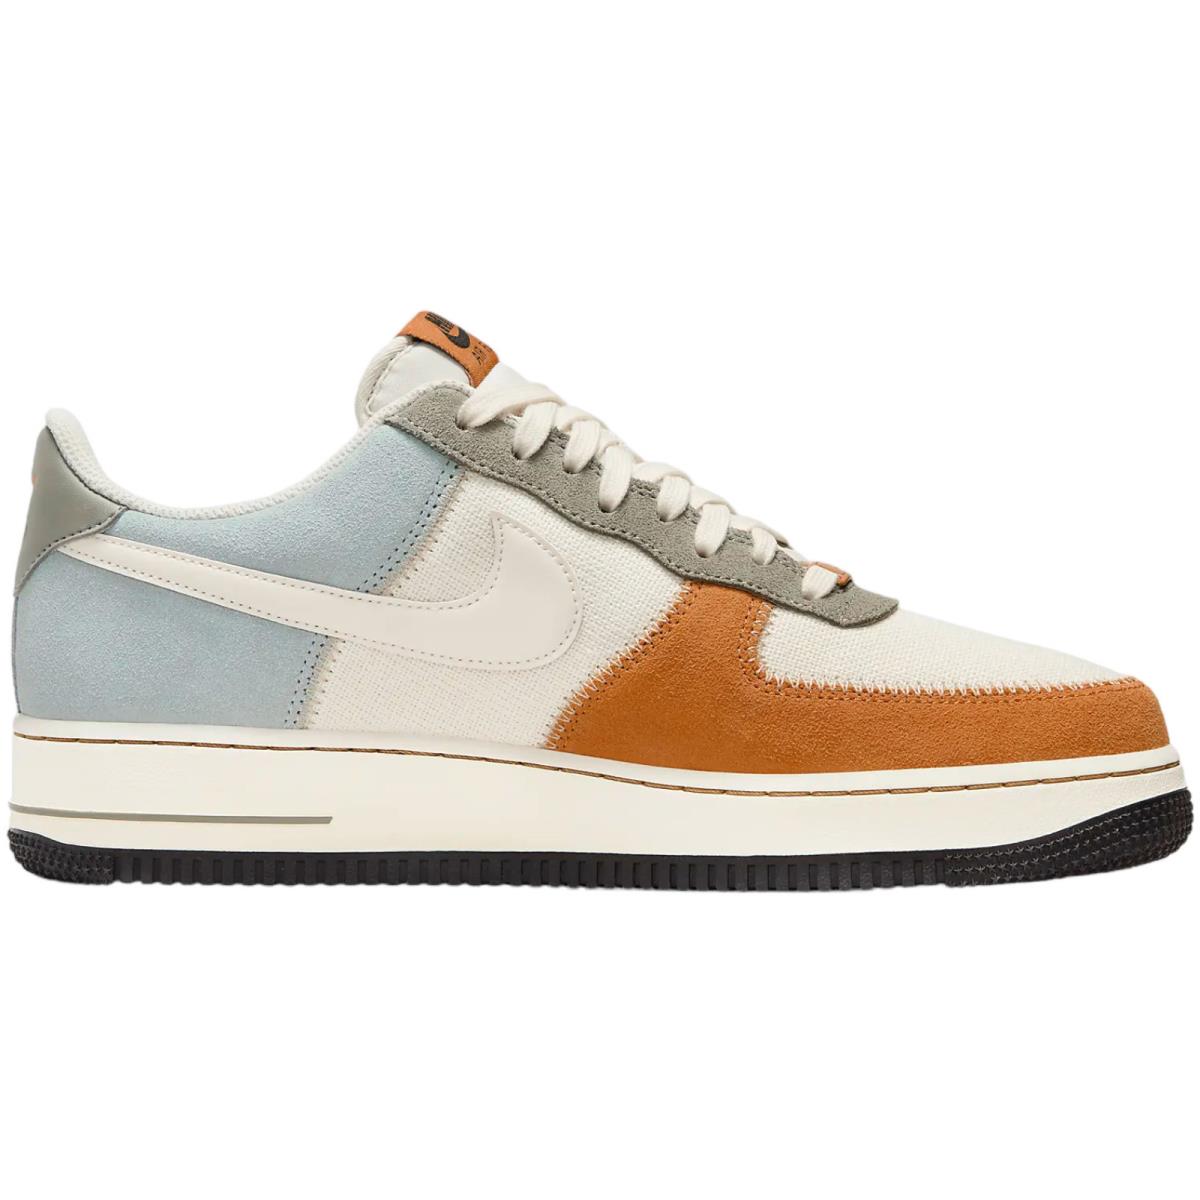 Nike Air Force 1 `07 Men`s Casual Shoes All Colors US Sizes 7-14 Light Pumice/Dark Stucco/Monarch/Pale Ivory